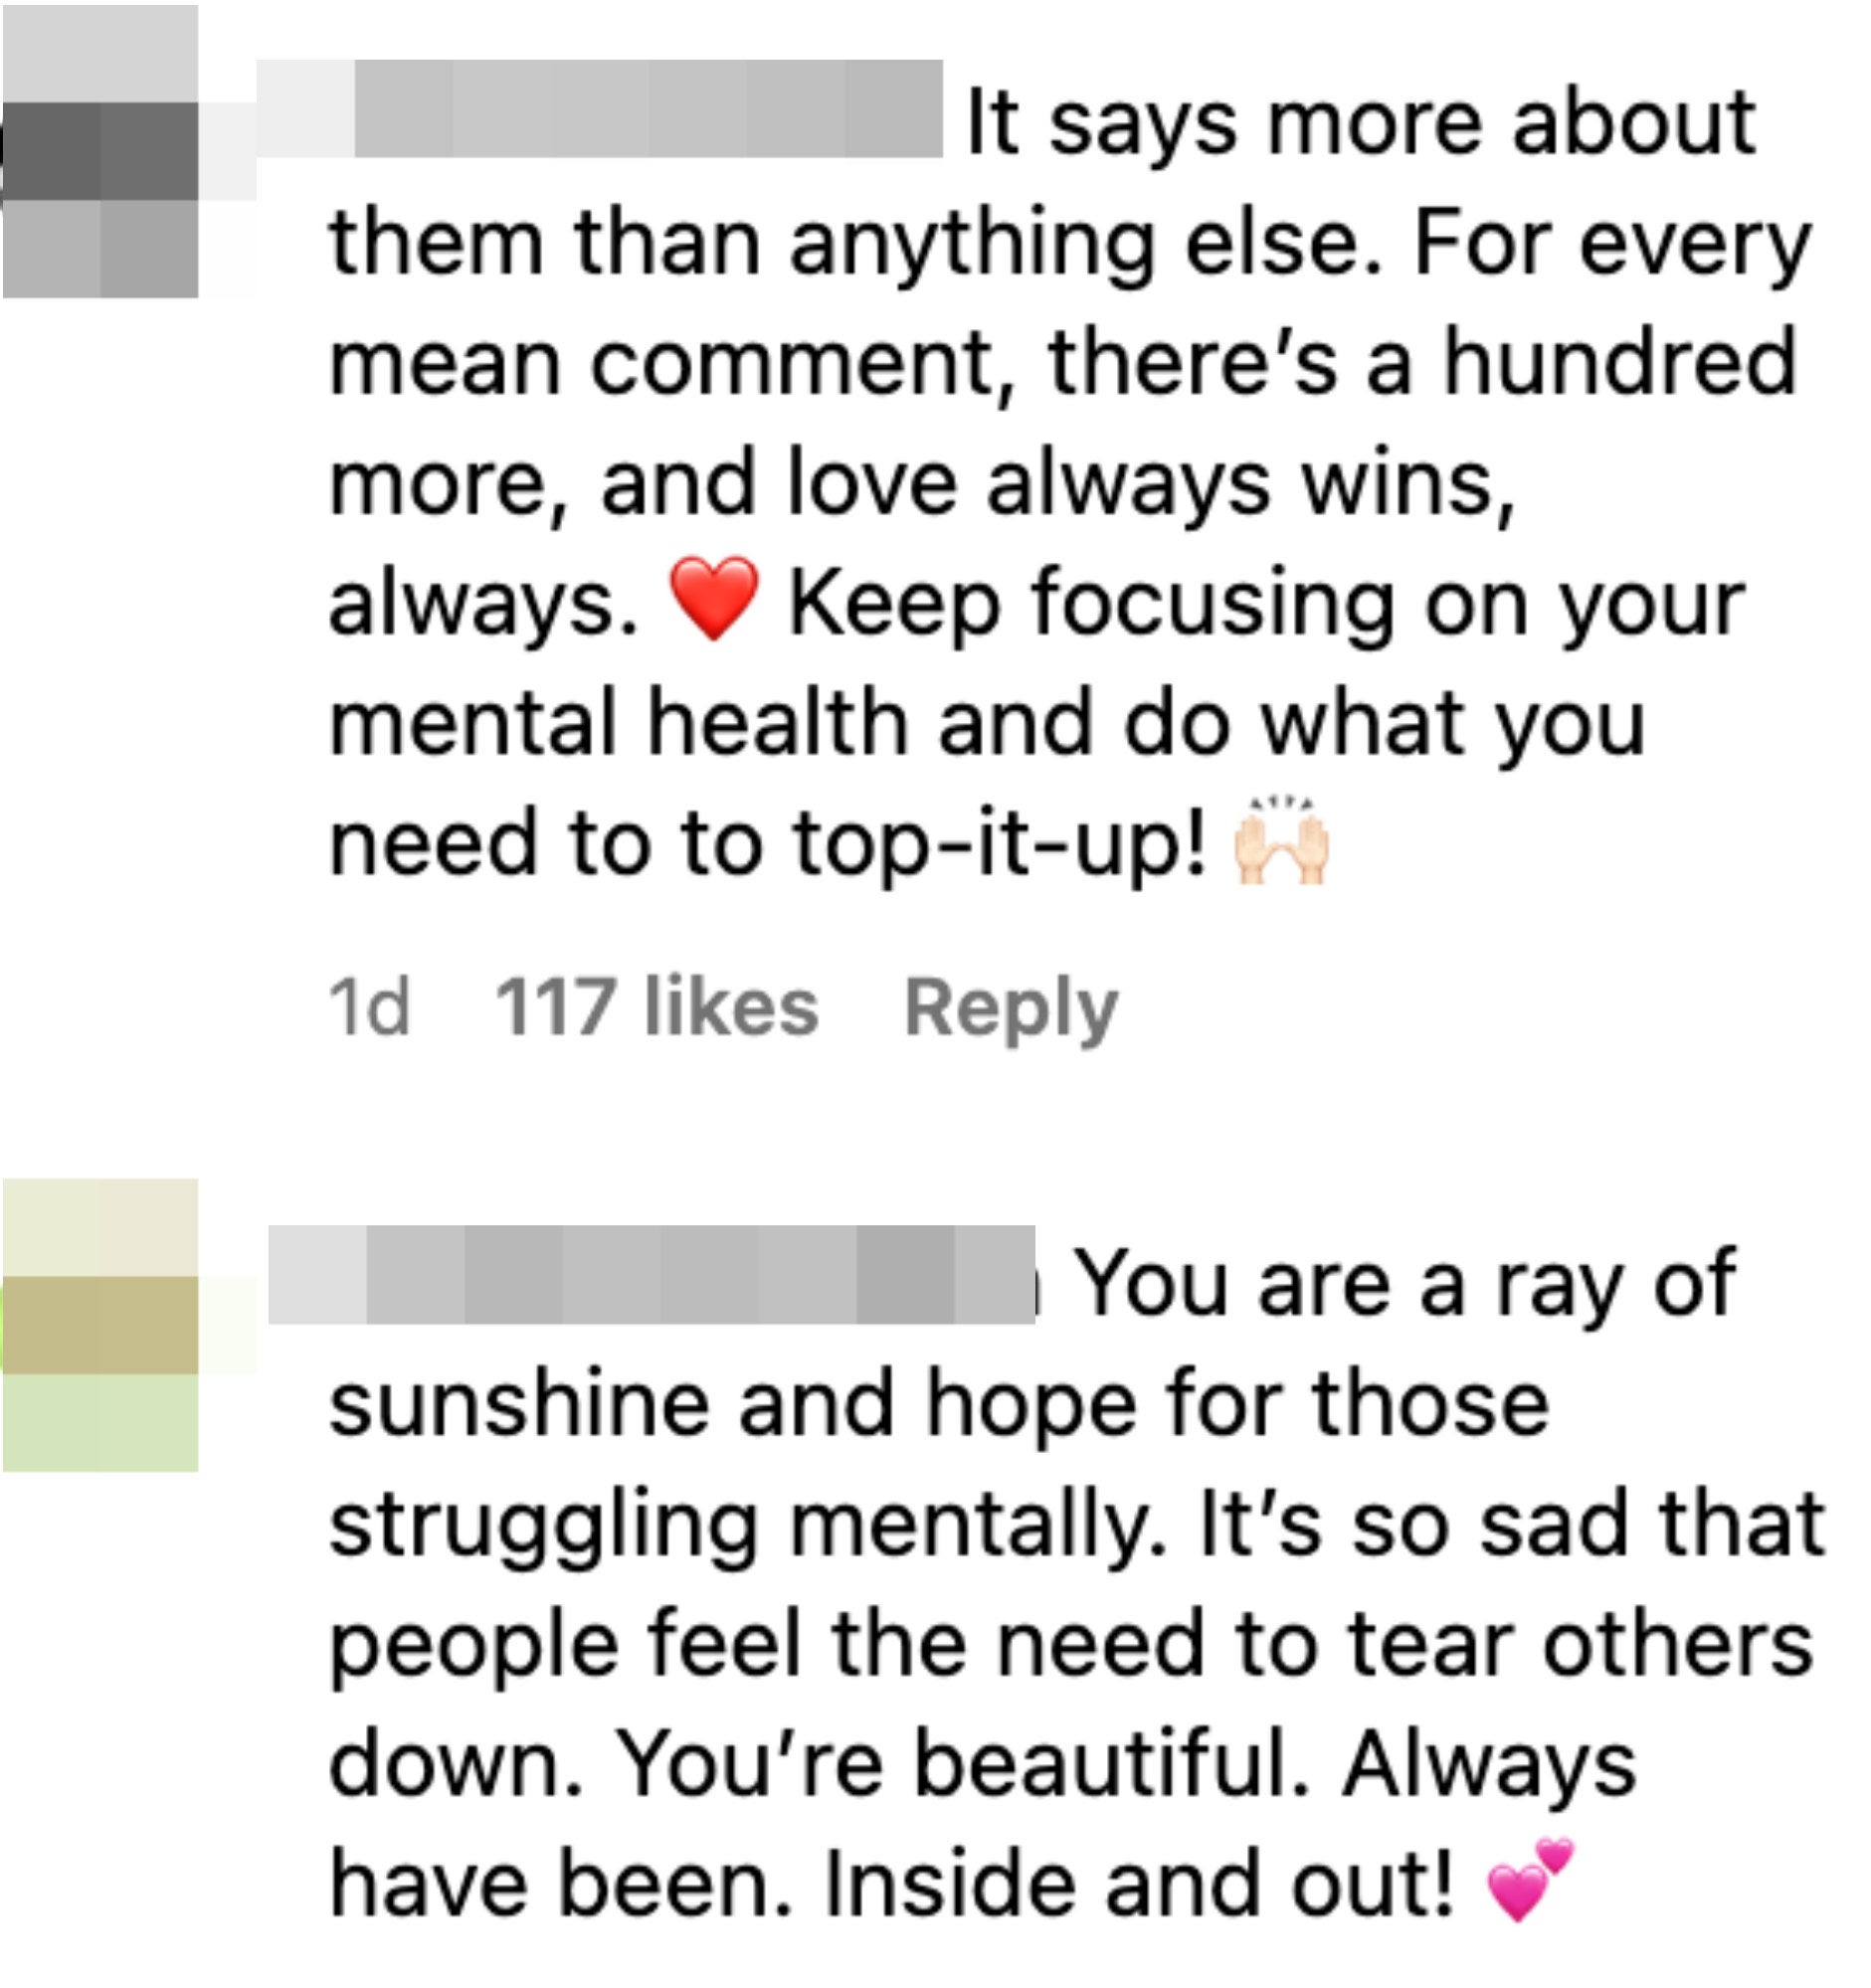 It says more about them than anything else. For every mean comment, there&#x27;s a hundred more, and love always wins, always [heart emoji] Keep focusing on your mental health and do what you need to to top-it-up